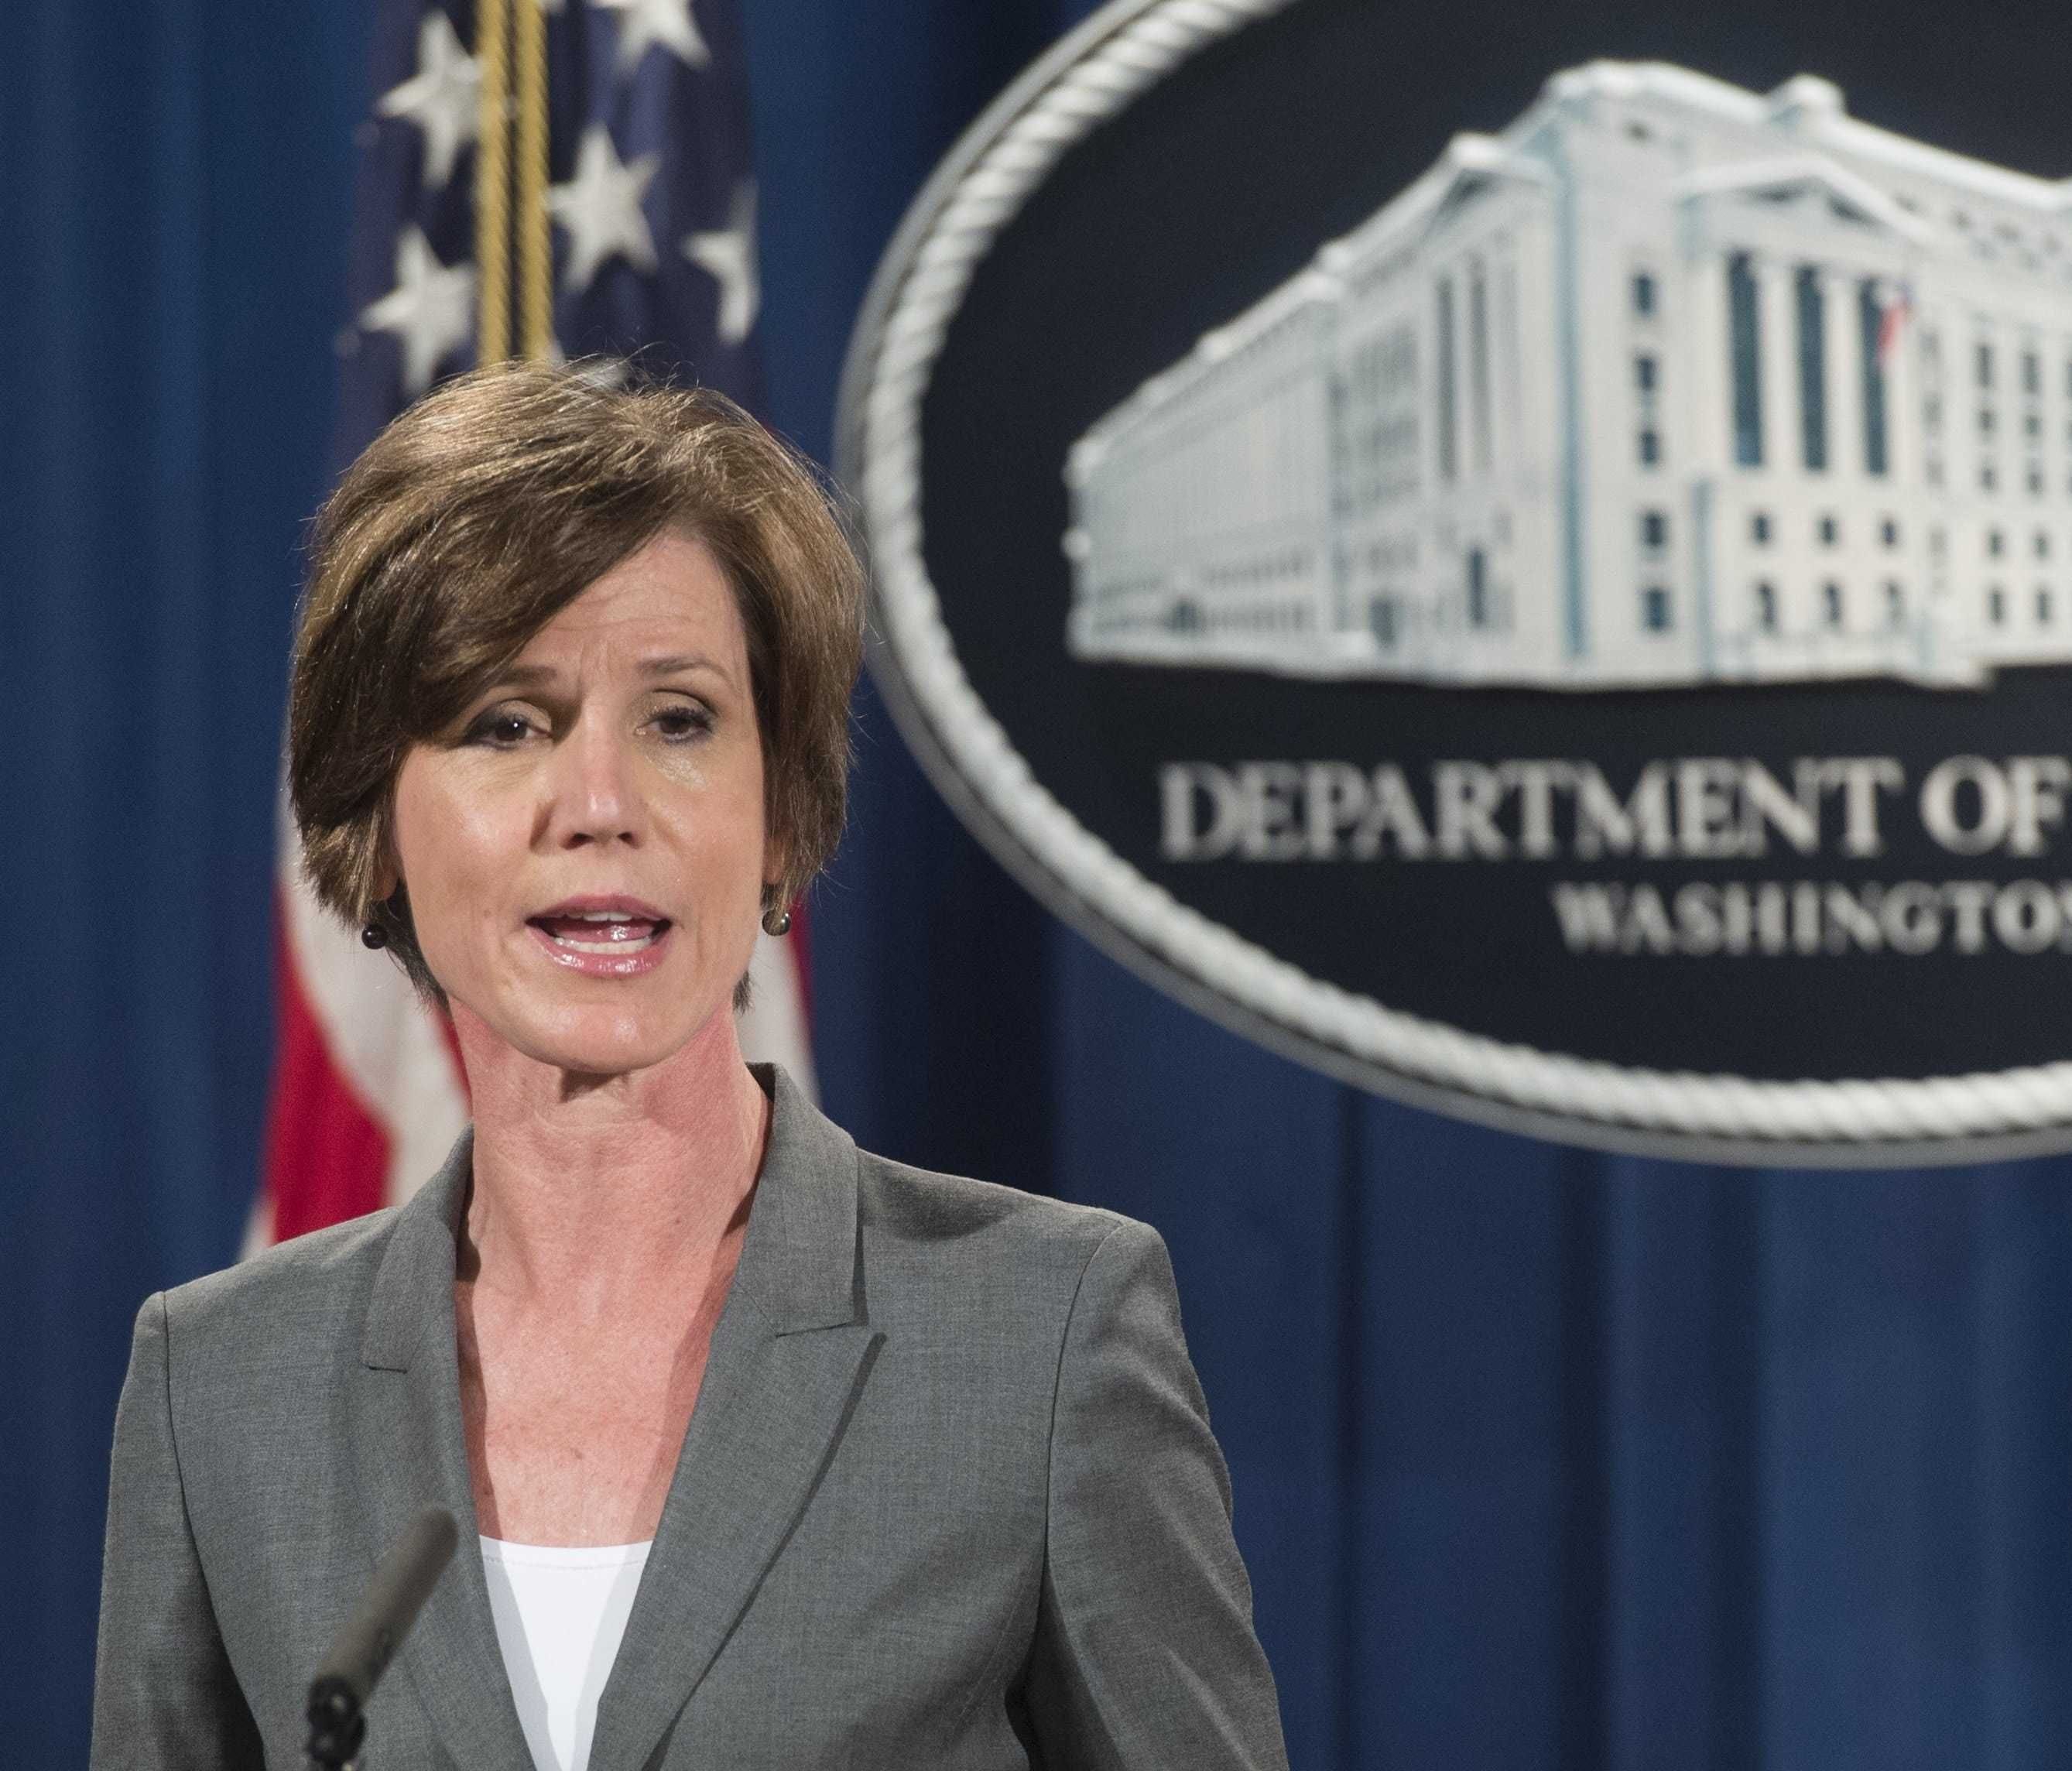 Sally Yates speaks during a press conference at the Department of Justice on June 28, 2016.